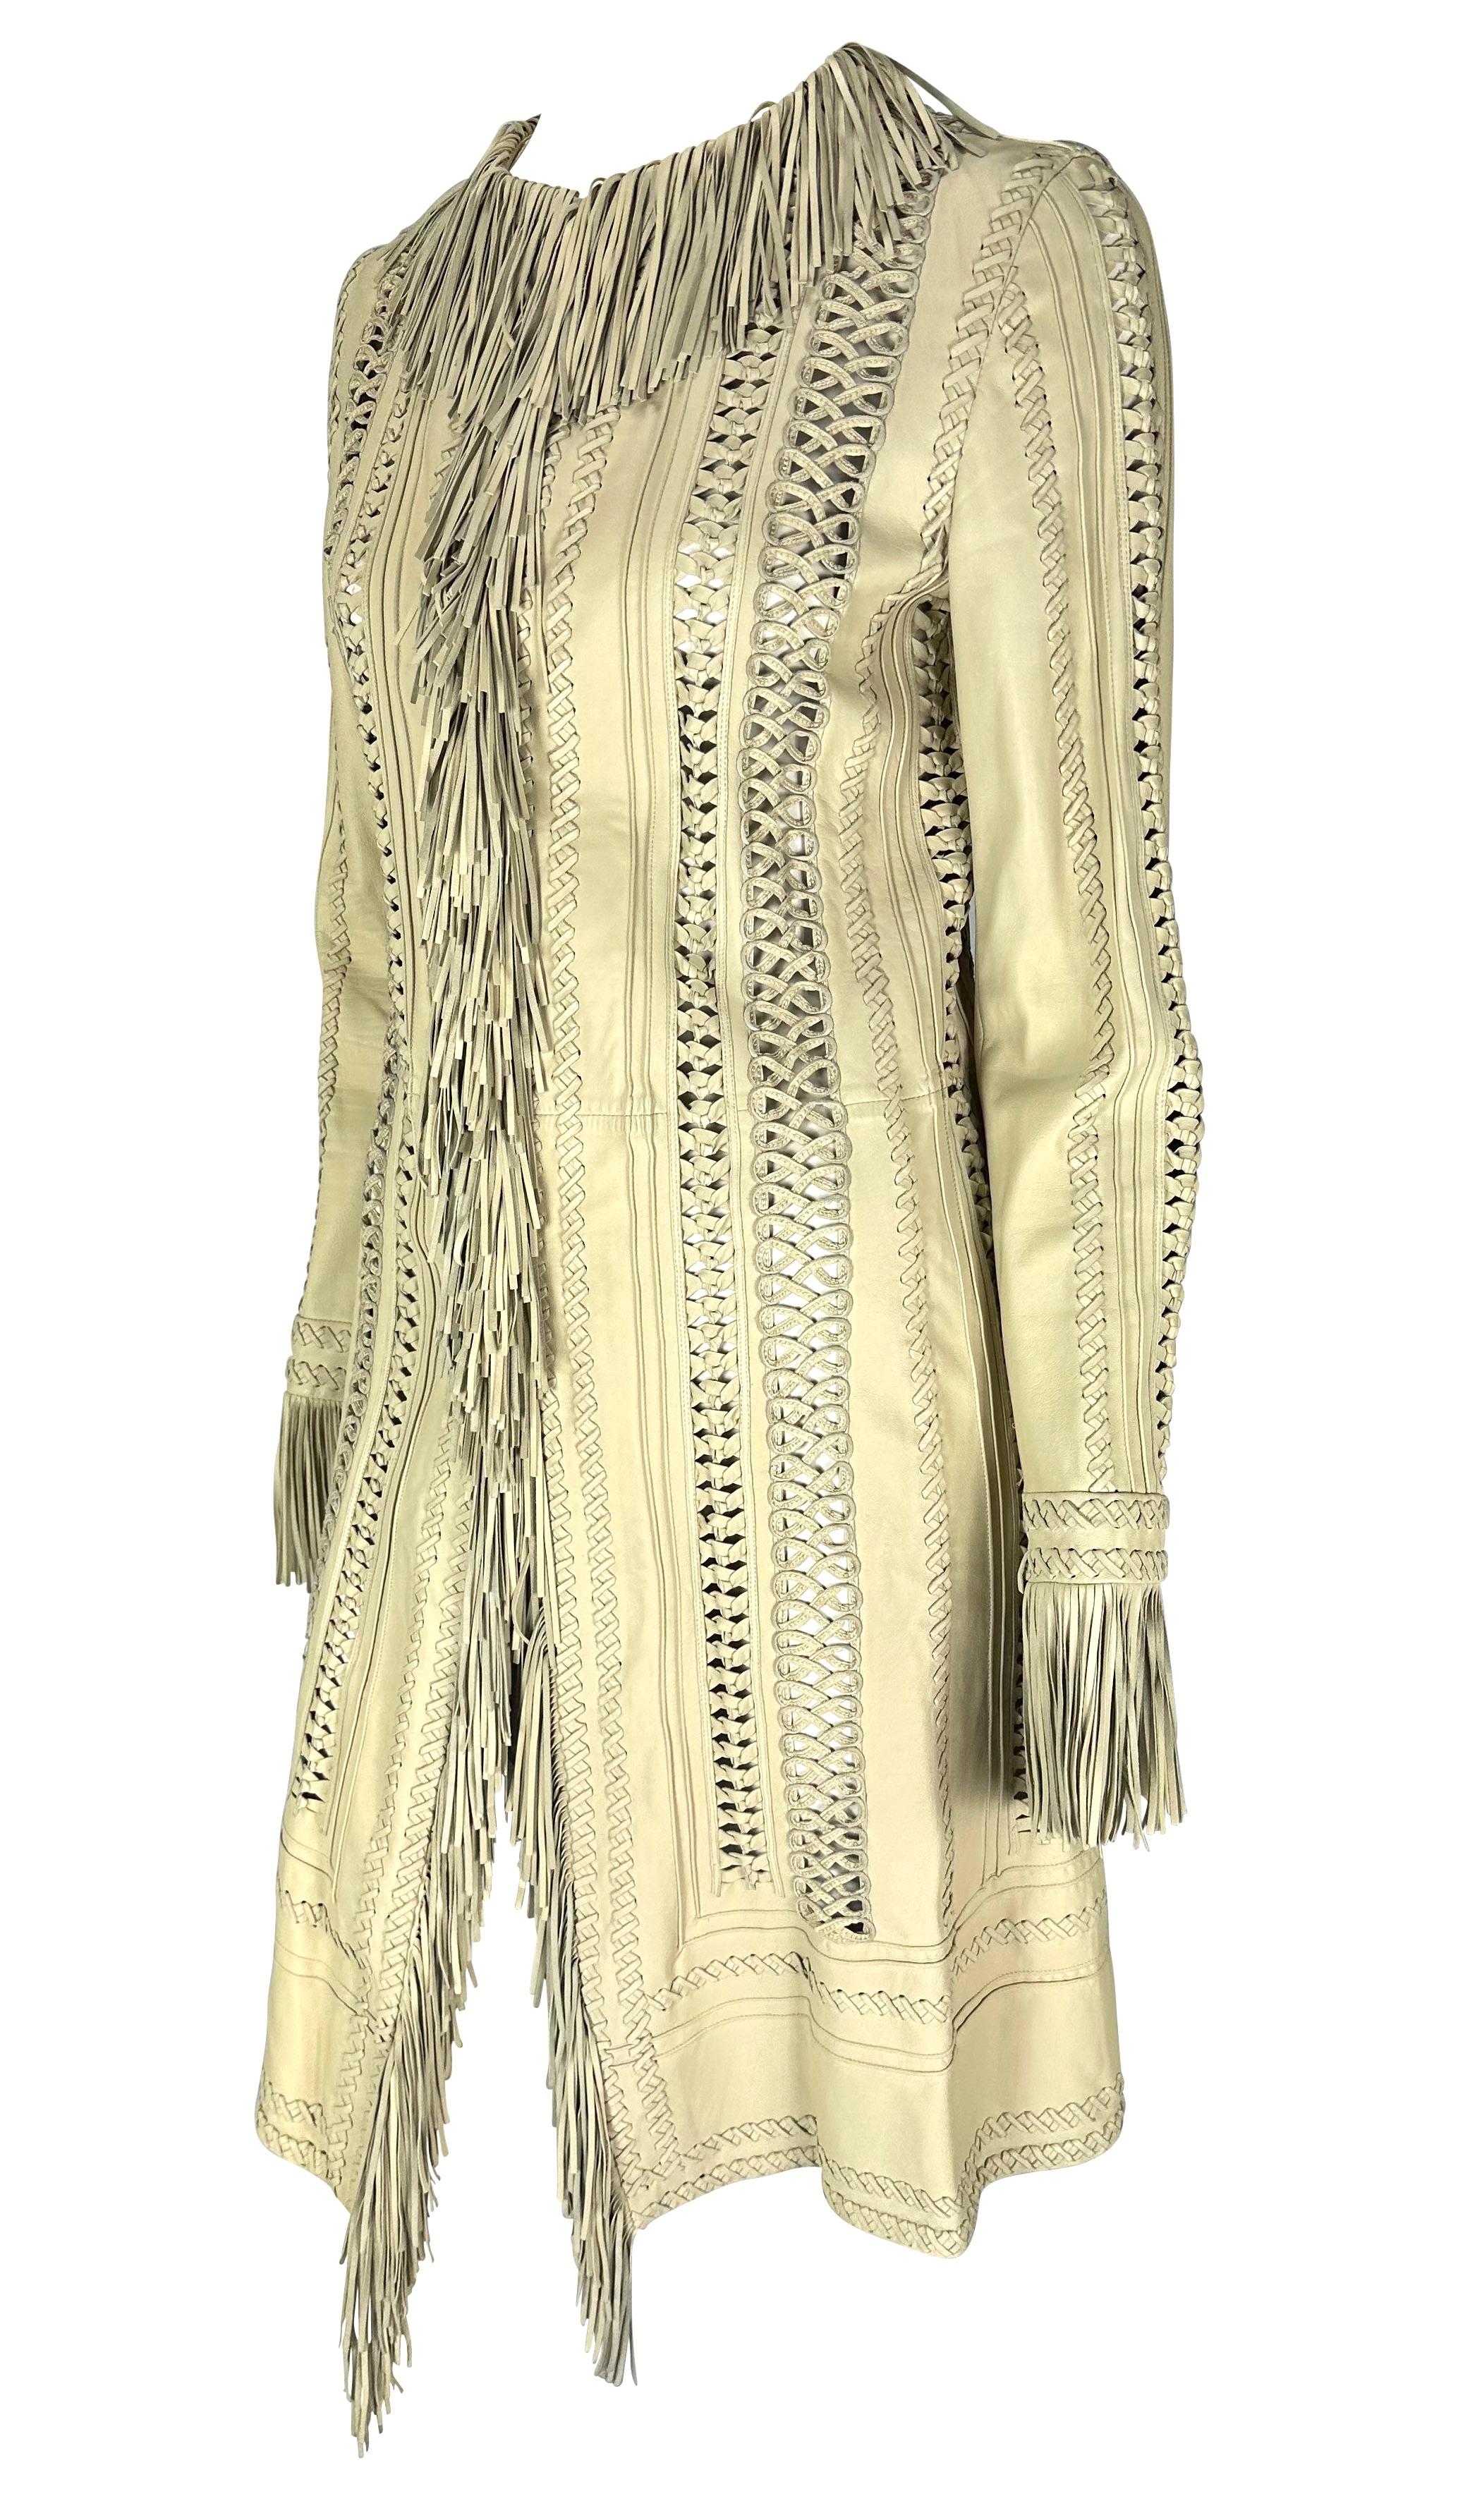 S/S 2002 Gianni Versace by Donatella Runway Fringe Panel Cream Leather Coat For Sale 1